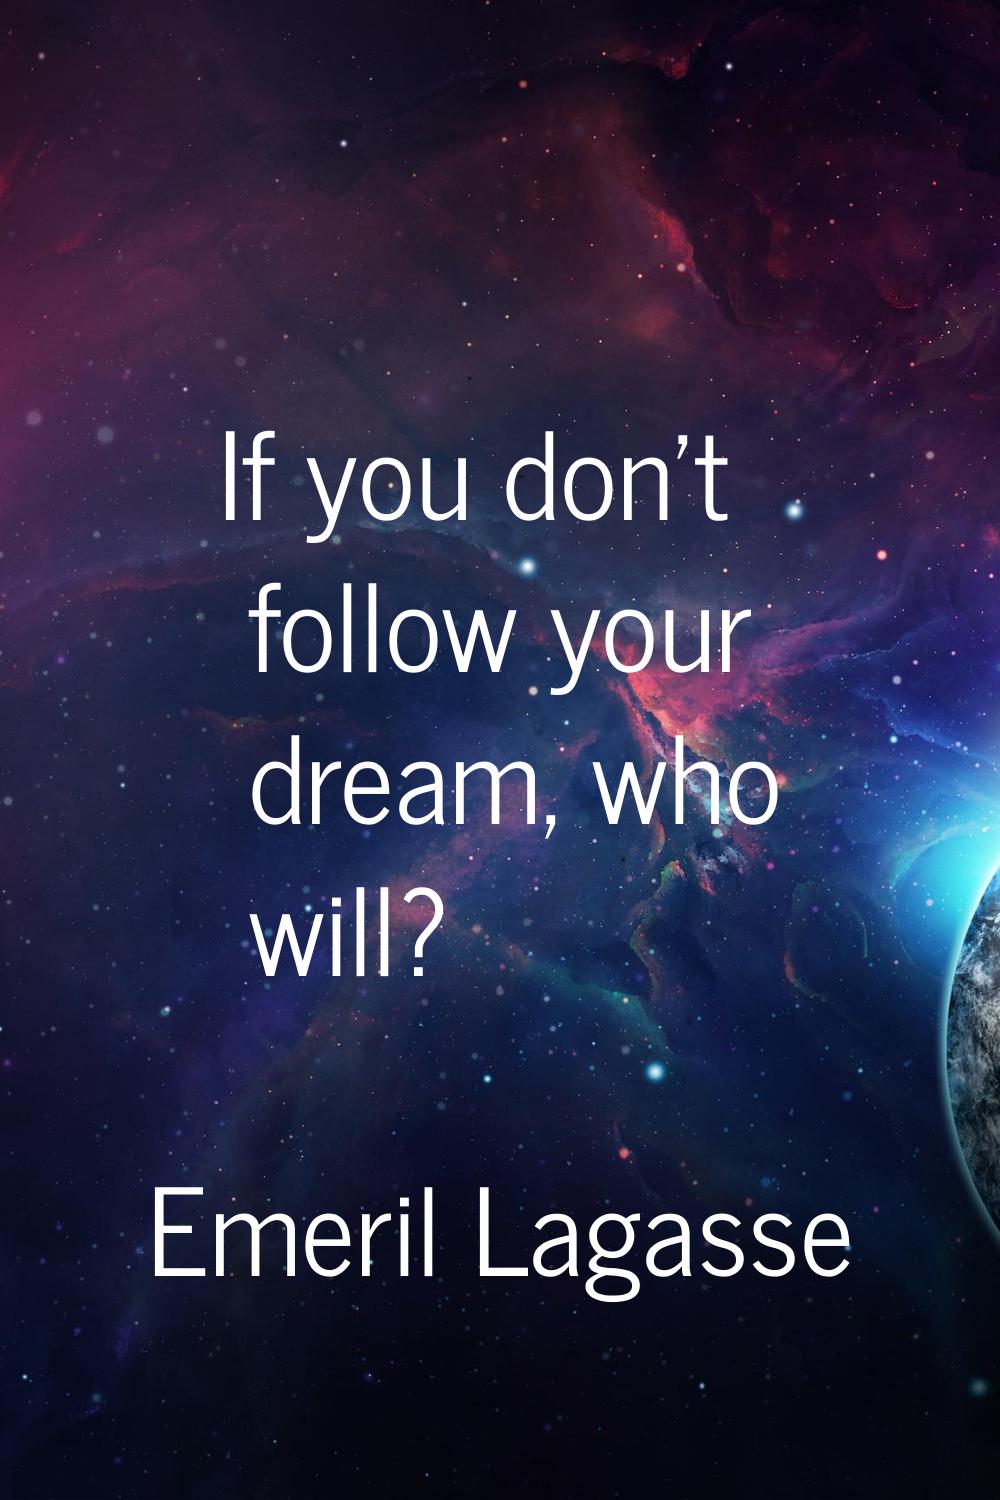 If you don't follow your dream, who will?